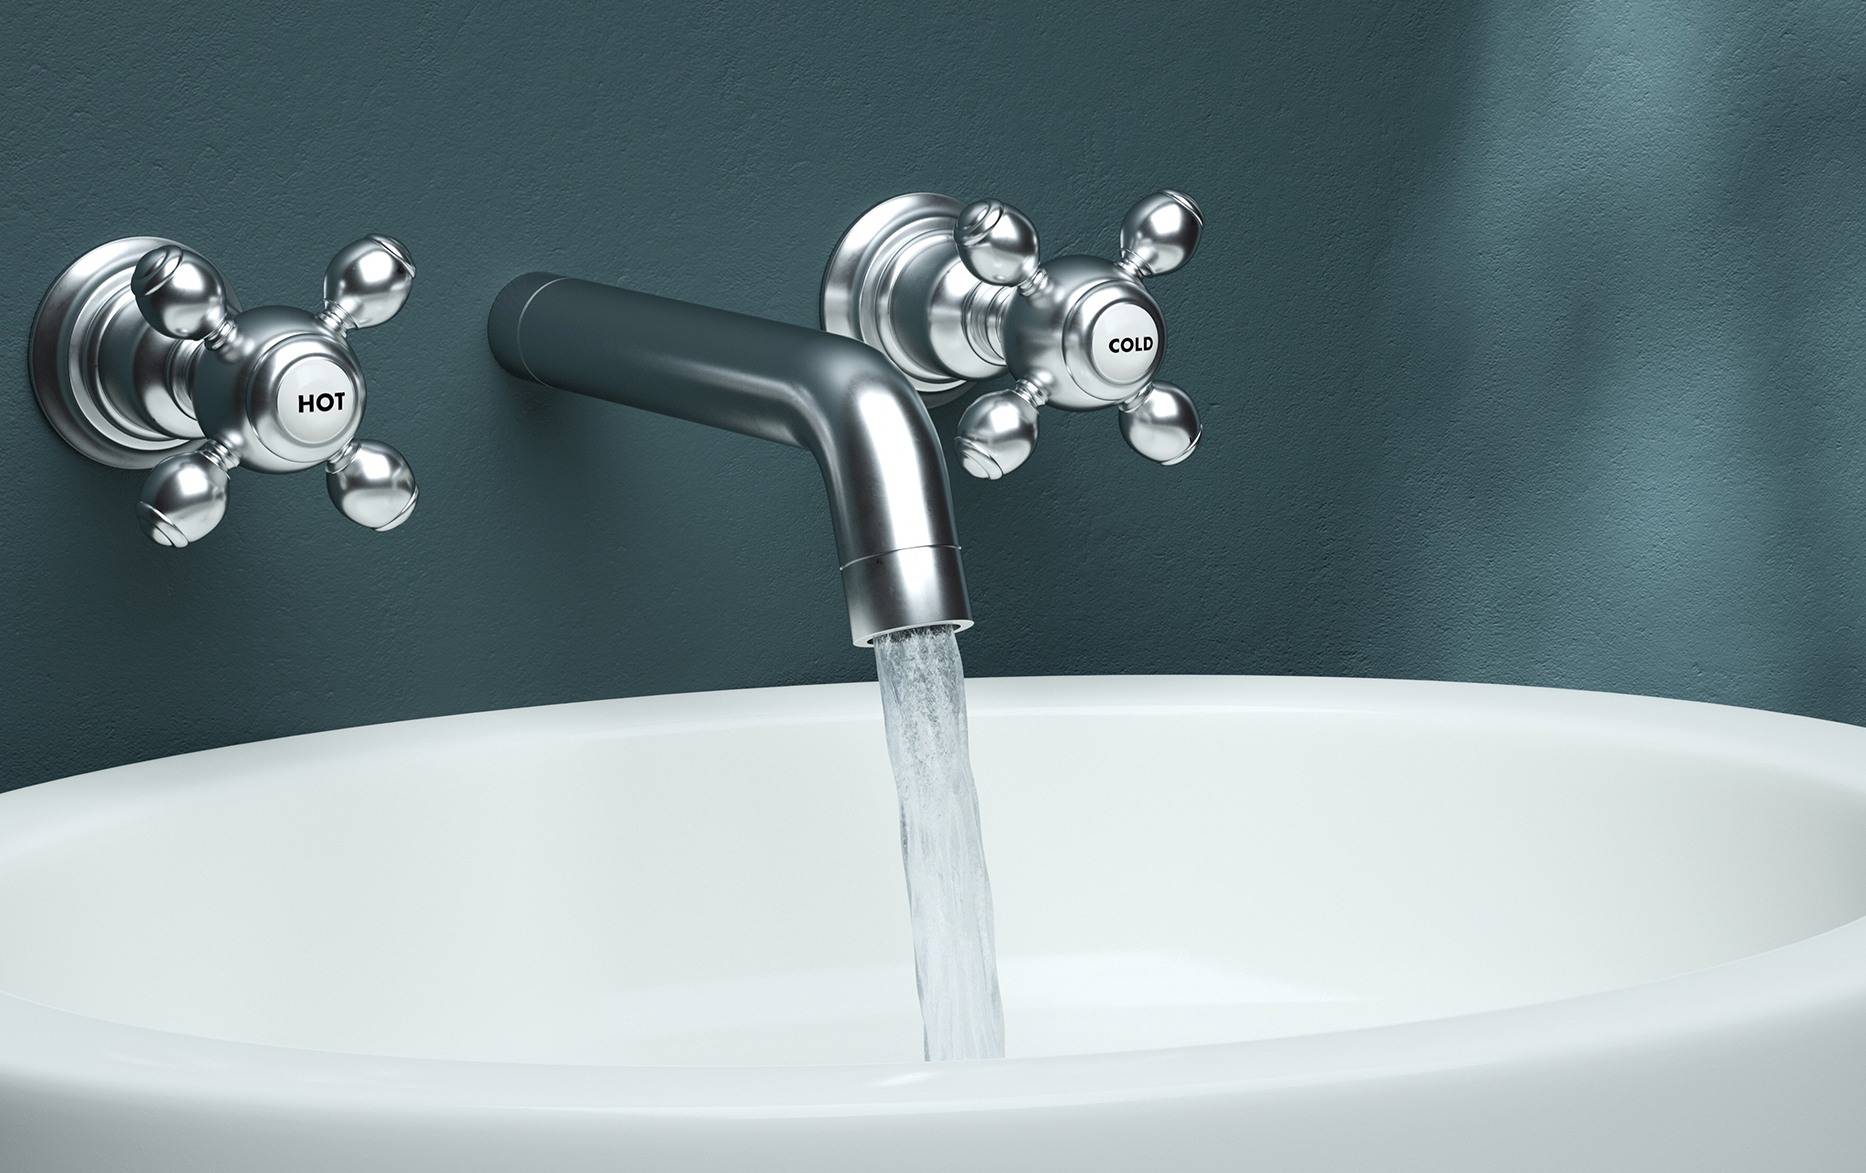 How to Clean Stainless Steel Bathroom Faucet